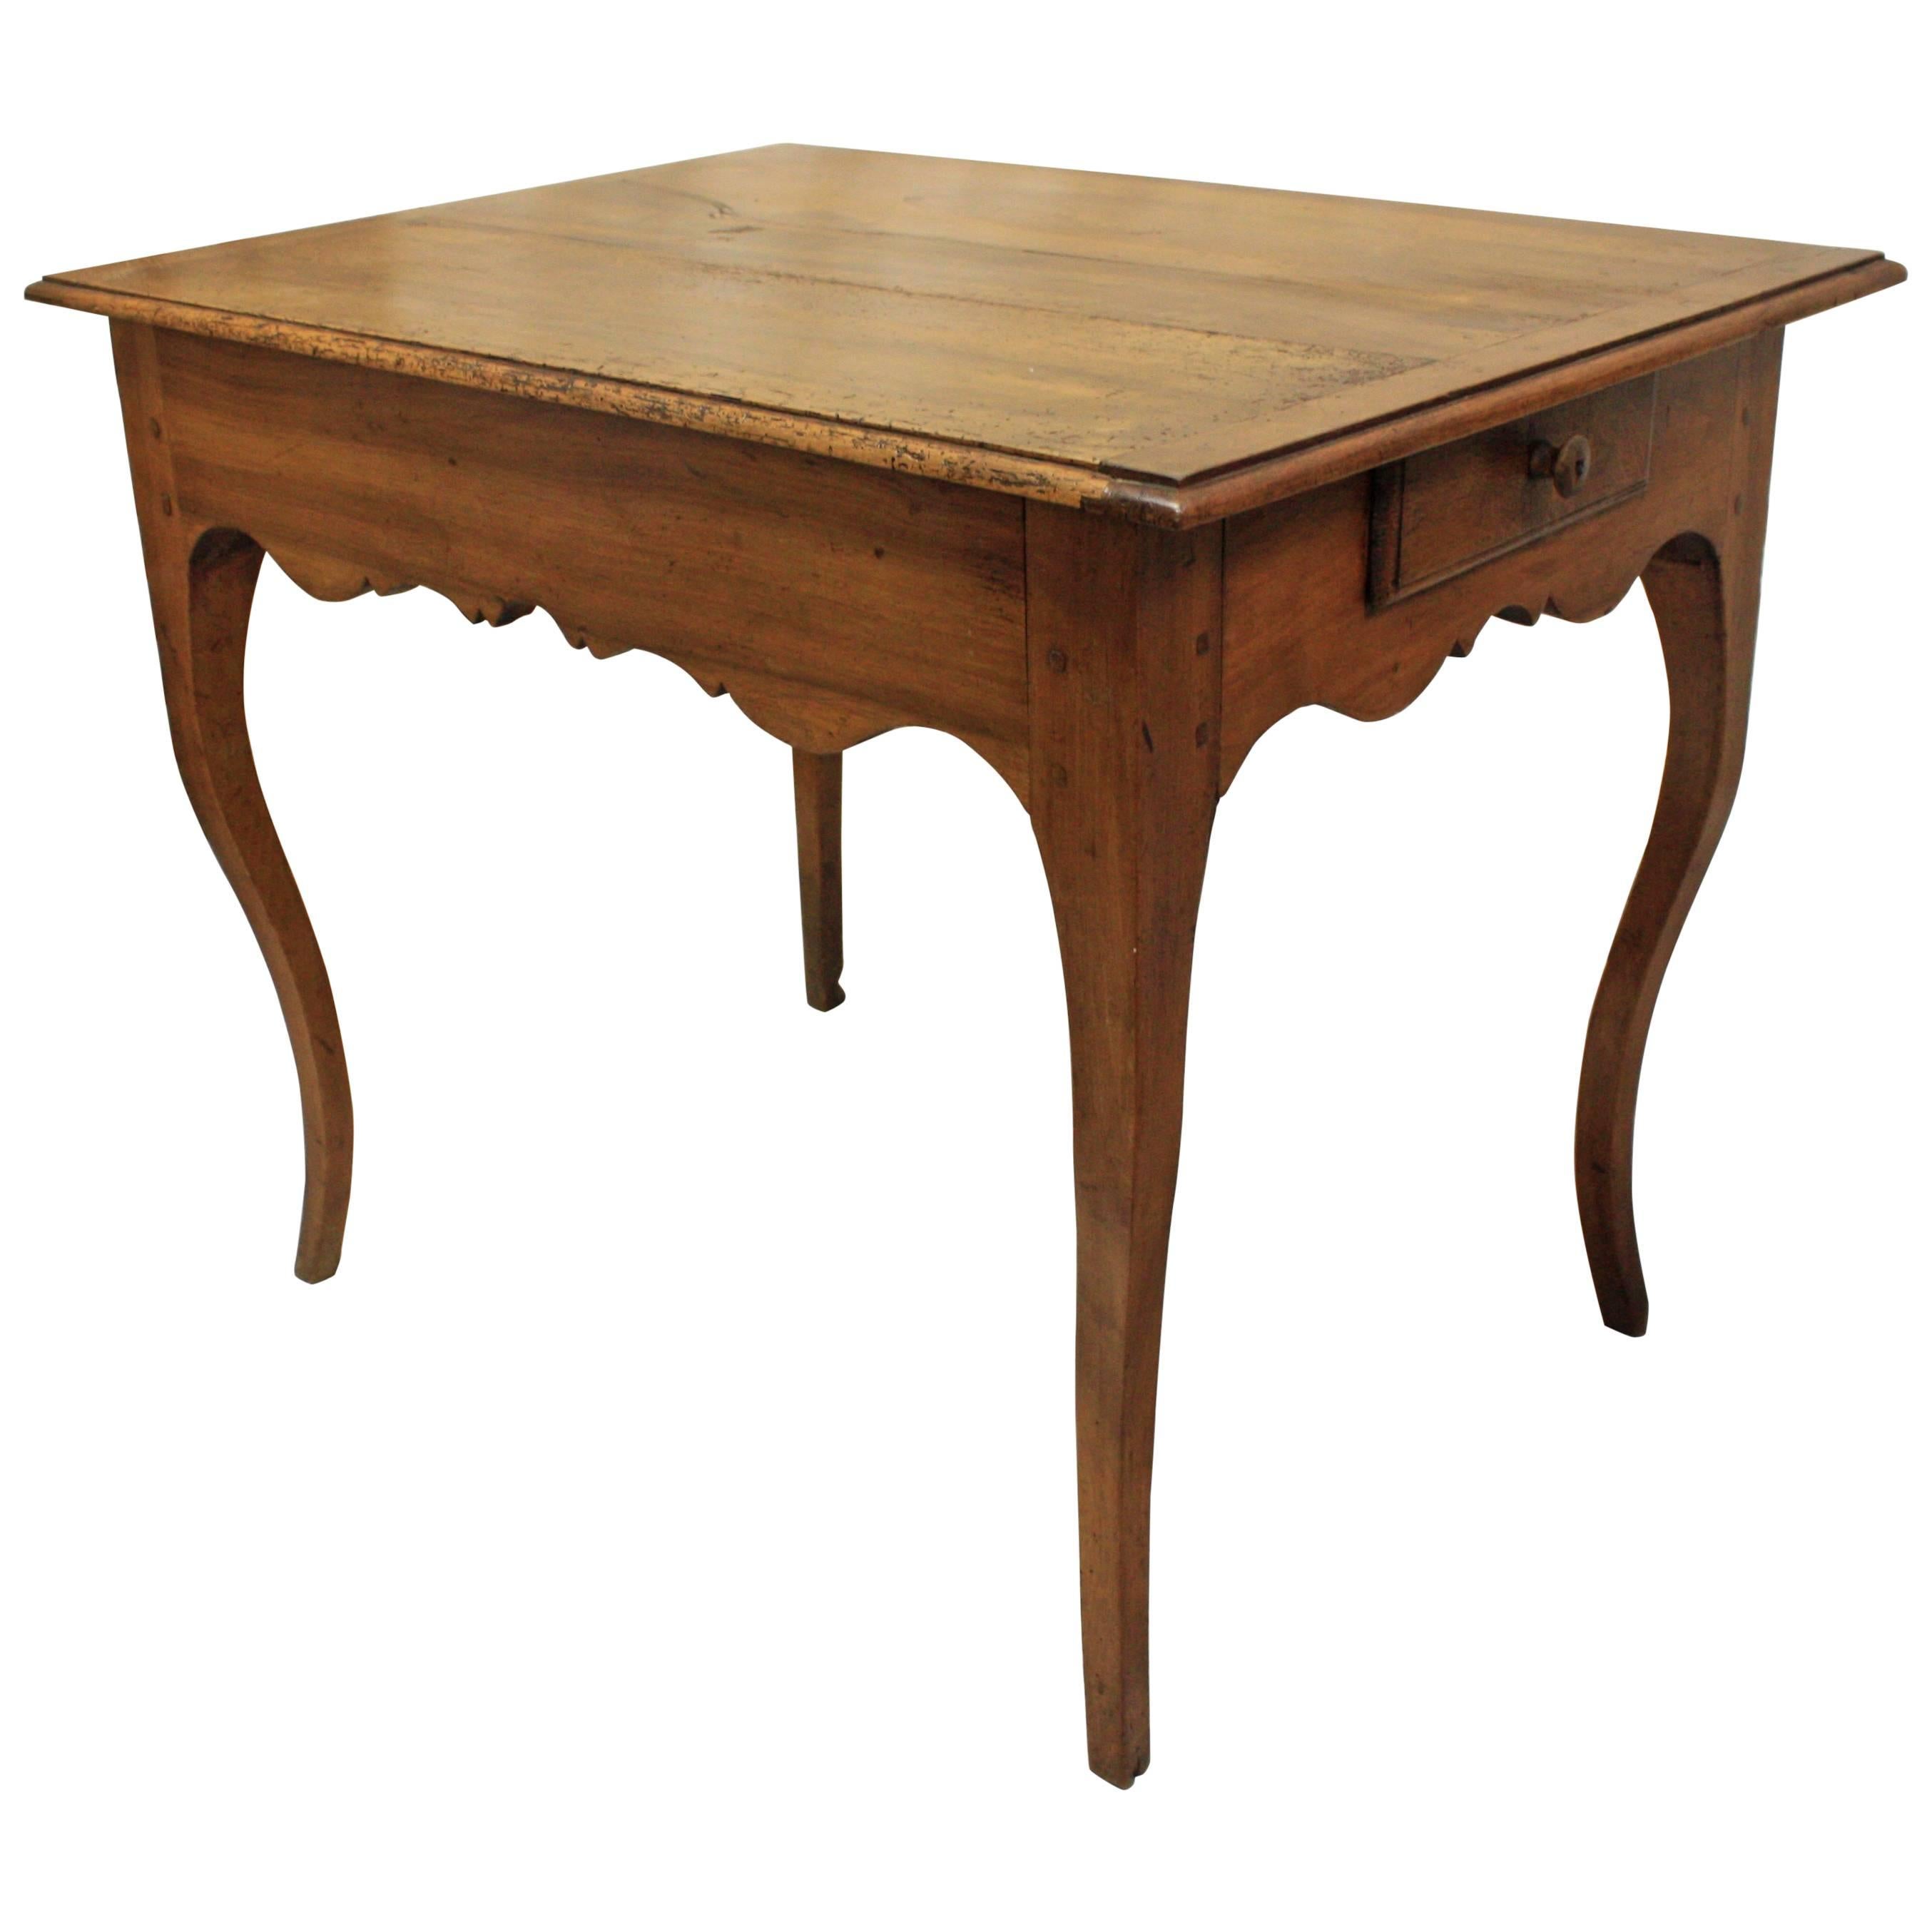 Charming 19th Century Provencal Table